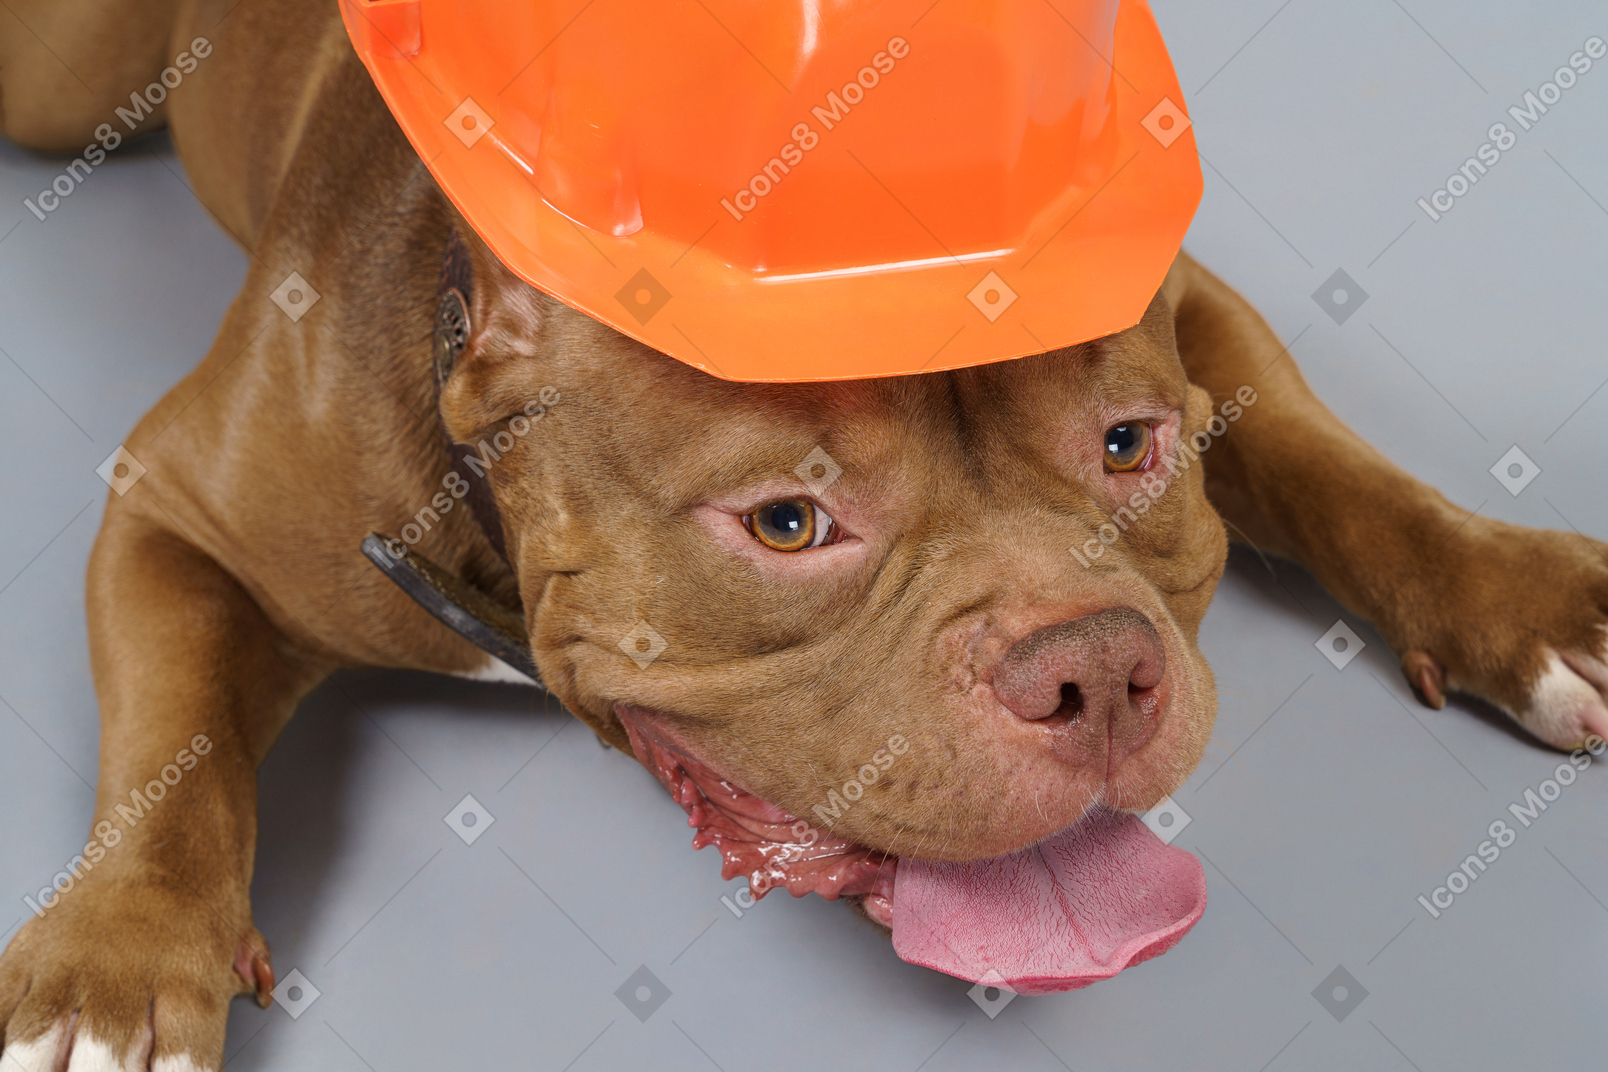 From above view a brown bulldog in orange helmet looking at camera